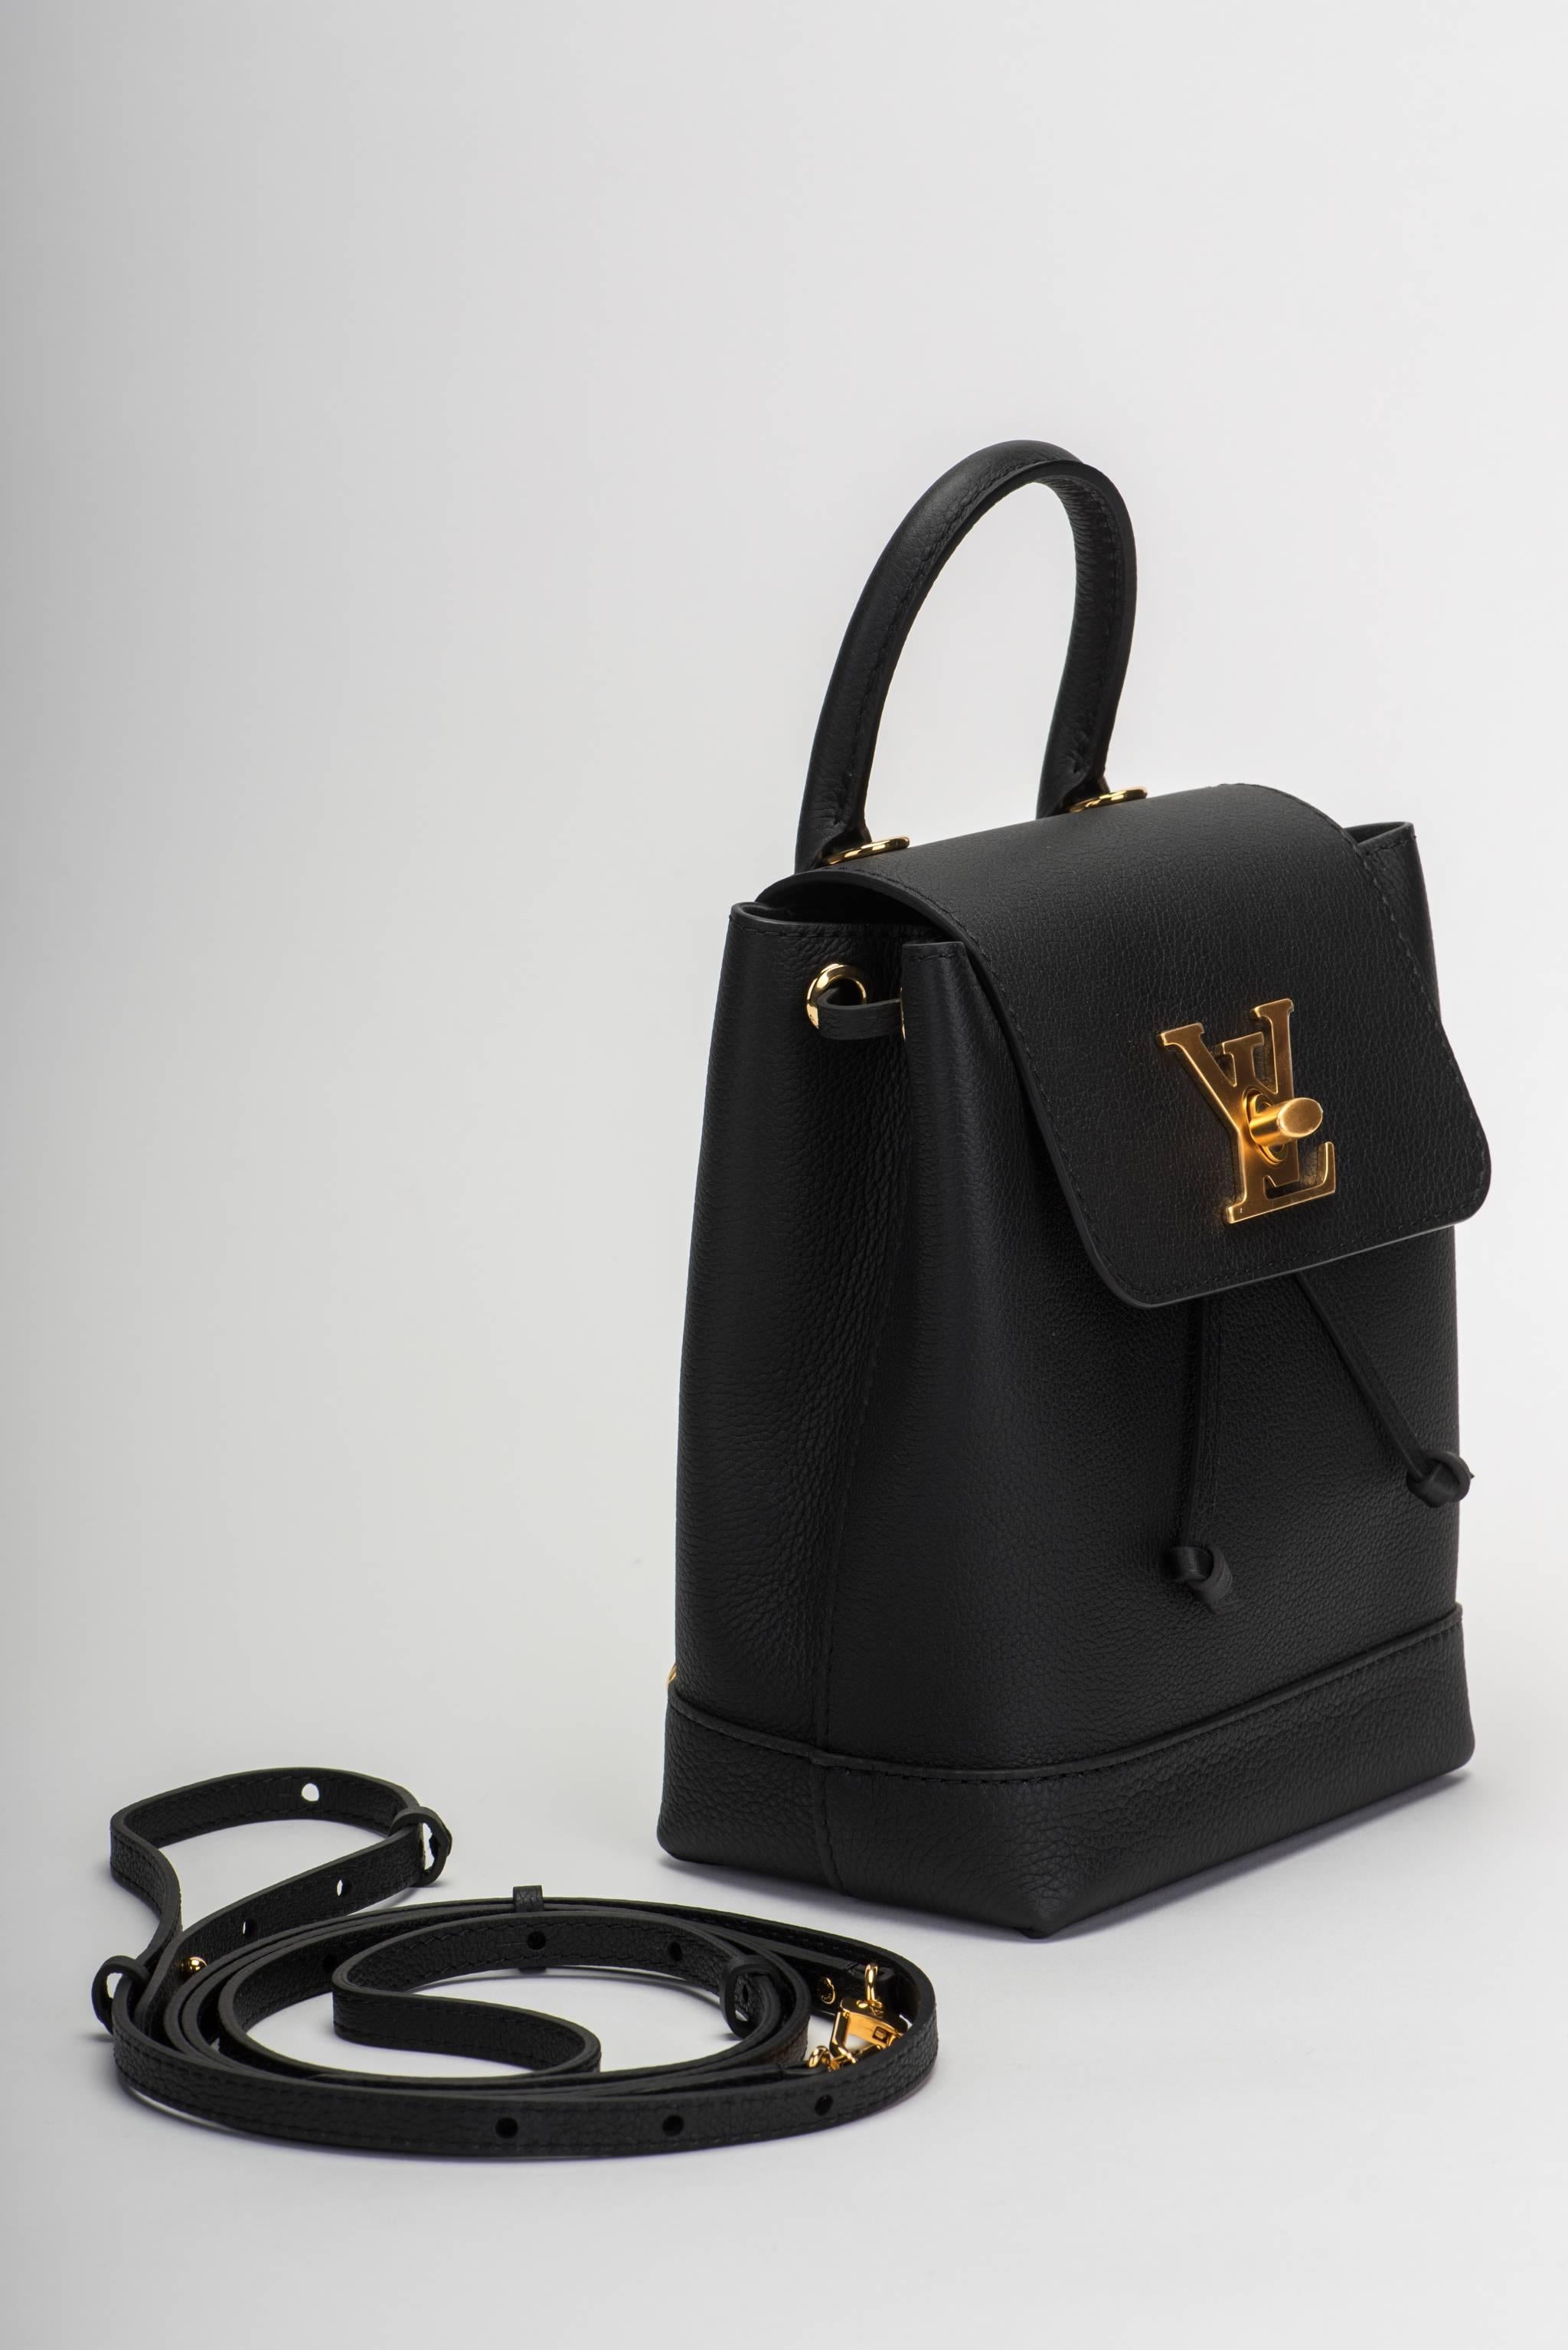 Louis Vuitton SOLD OUT limited edition lockme mini backpack in black leather and satin gold metal. Very versatile and young can be worn also as cross body. Brand new in box , comes with dust cover , box and shopper.